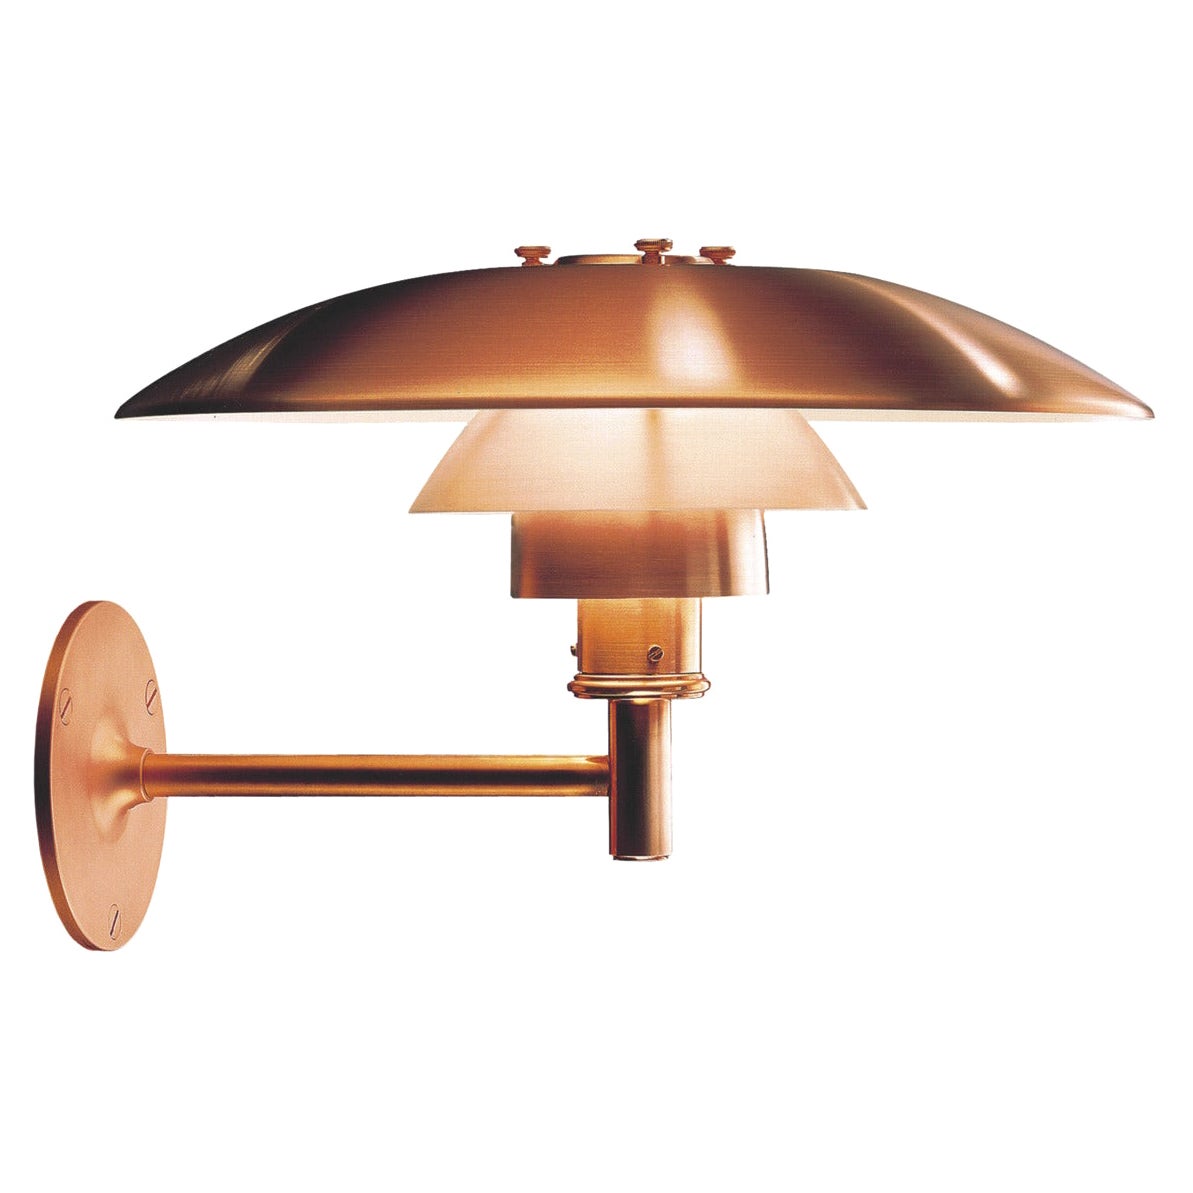 Large Poul Henningsen 'PH Wall' Outdoor Sconce for Louis Poulsen in Raw Copper